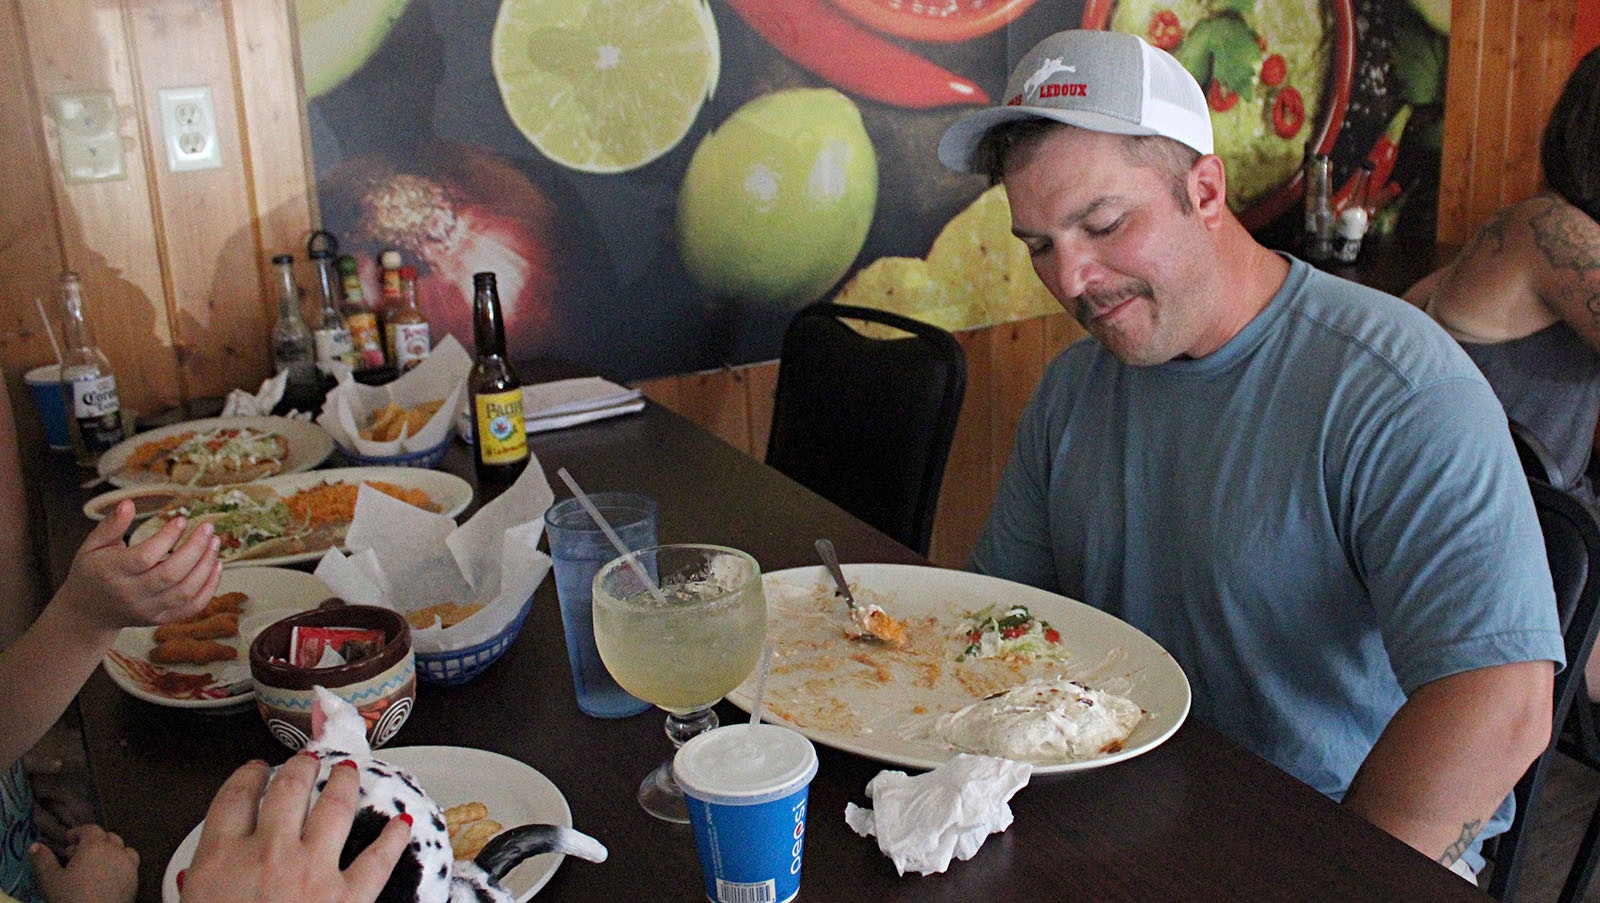 The moment when Cordell Betters raised the white flag of surrender to a 5-pound burrito.